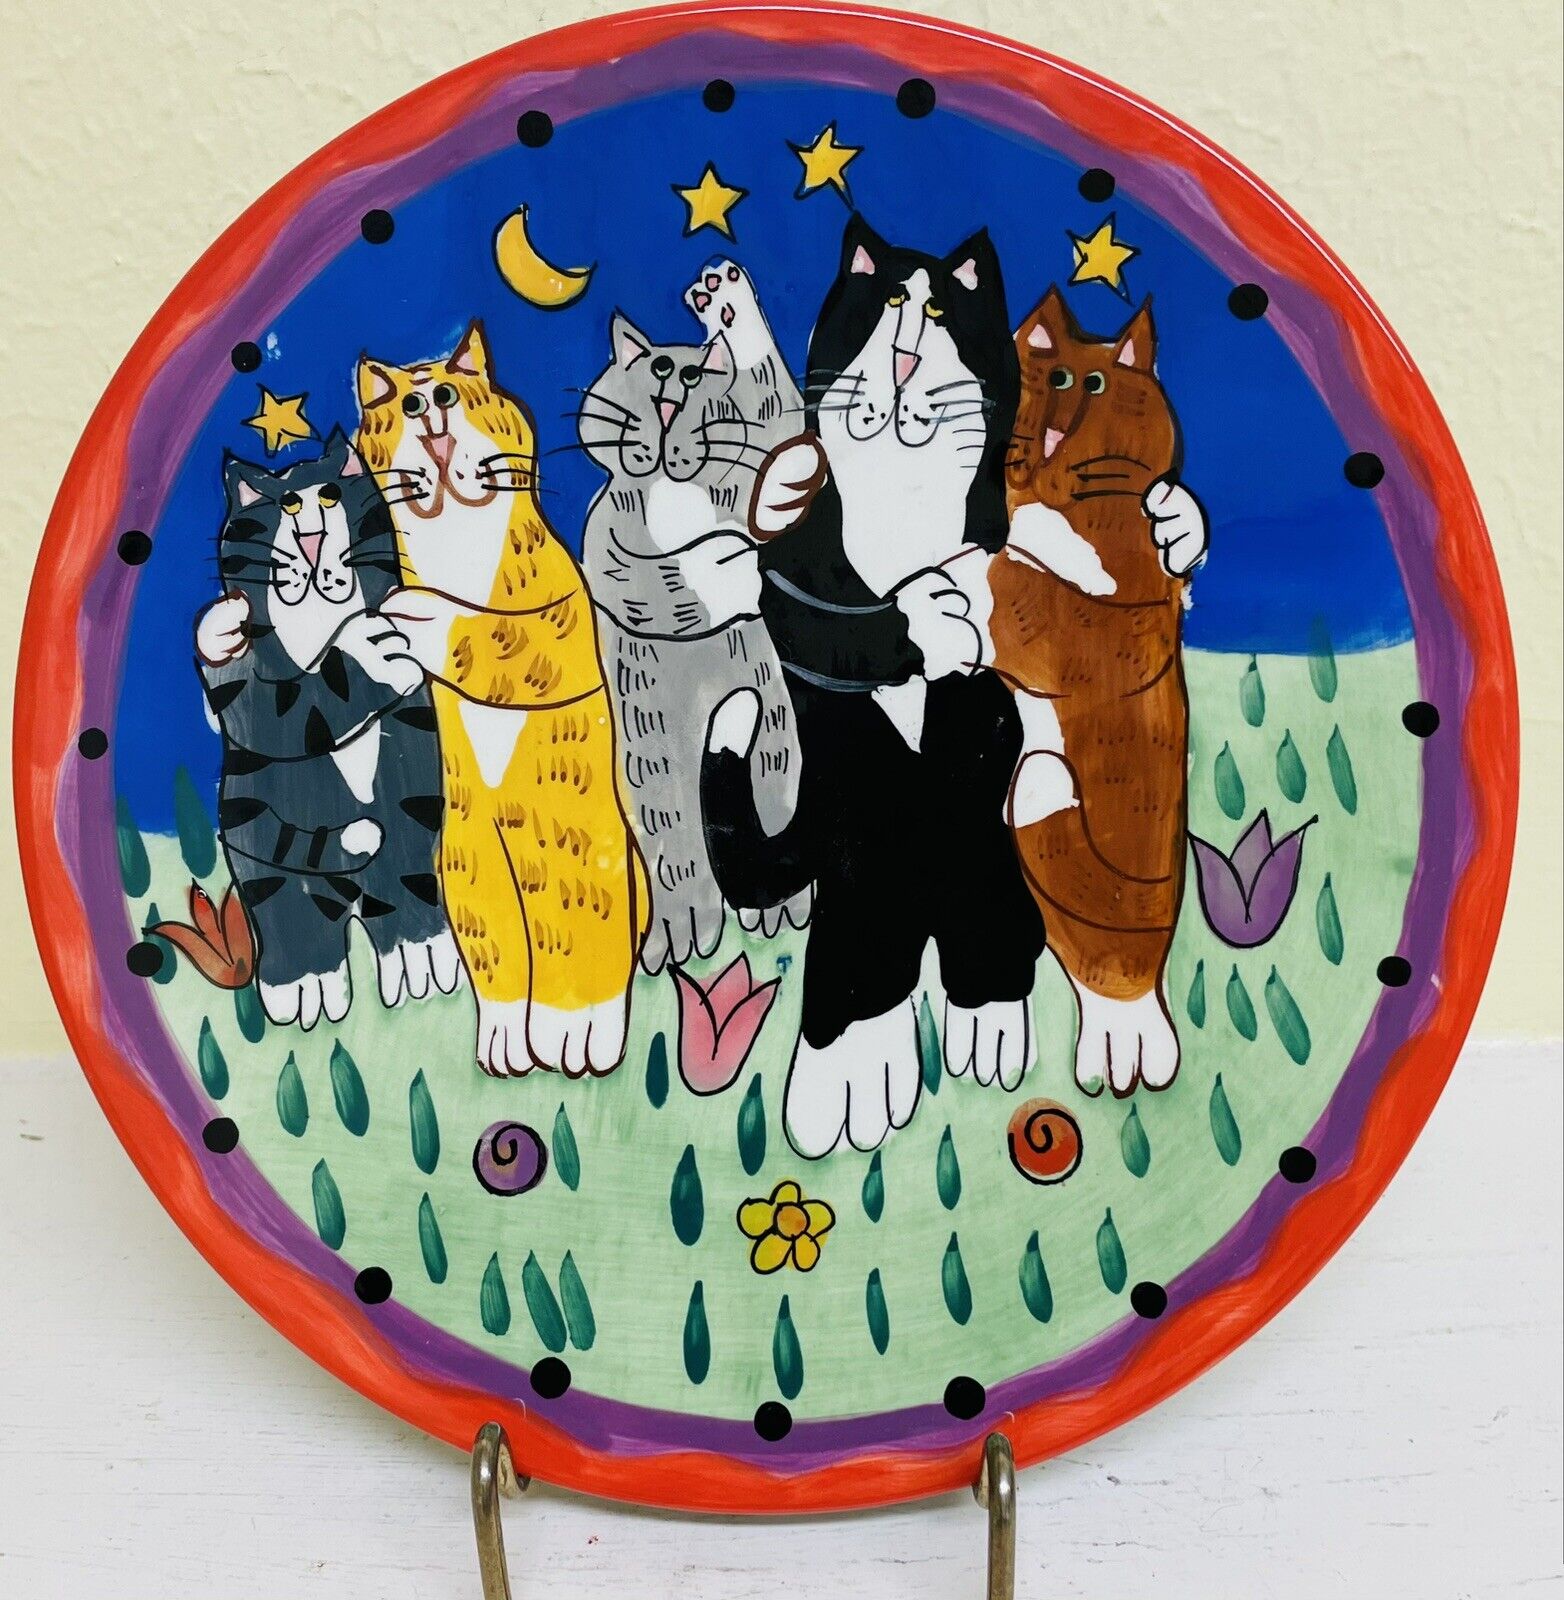 CATZILLA Colorful Plate “Spring Fever—Hugging Cats” Candice Reiter Designs 2001